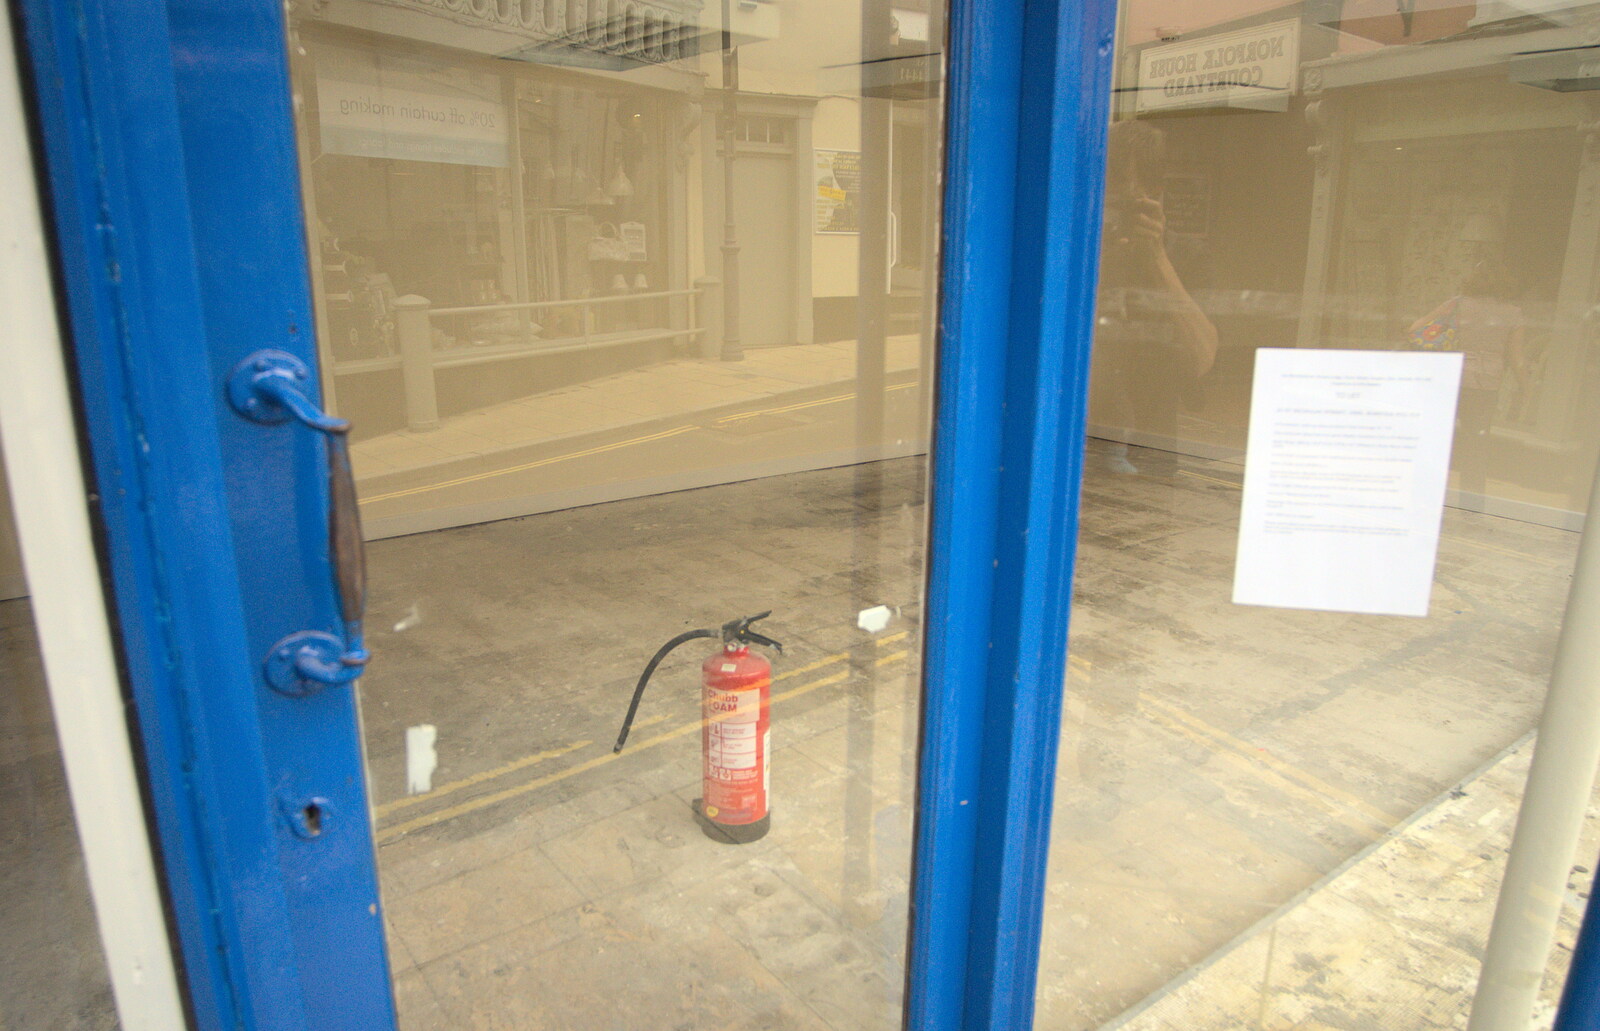 Abandoned fire extinguisher in the old Blockbuster from Grandad's Gaff and Music in the Park, Diss, Norfolk - 16th June 2012